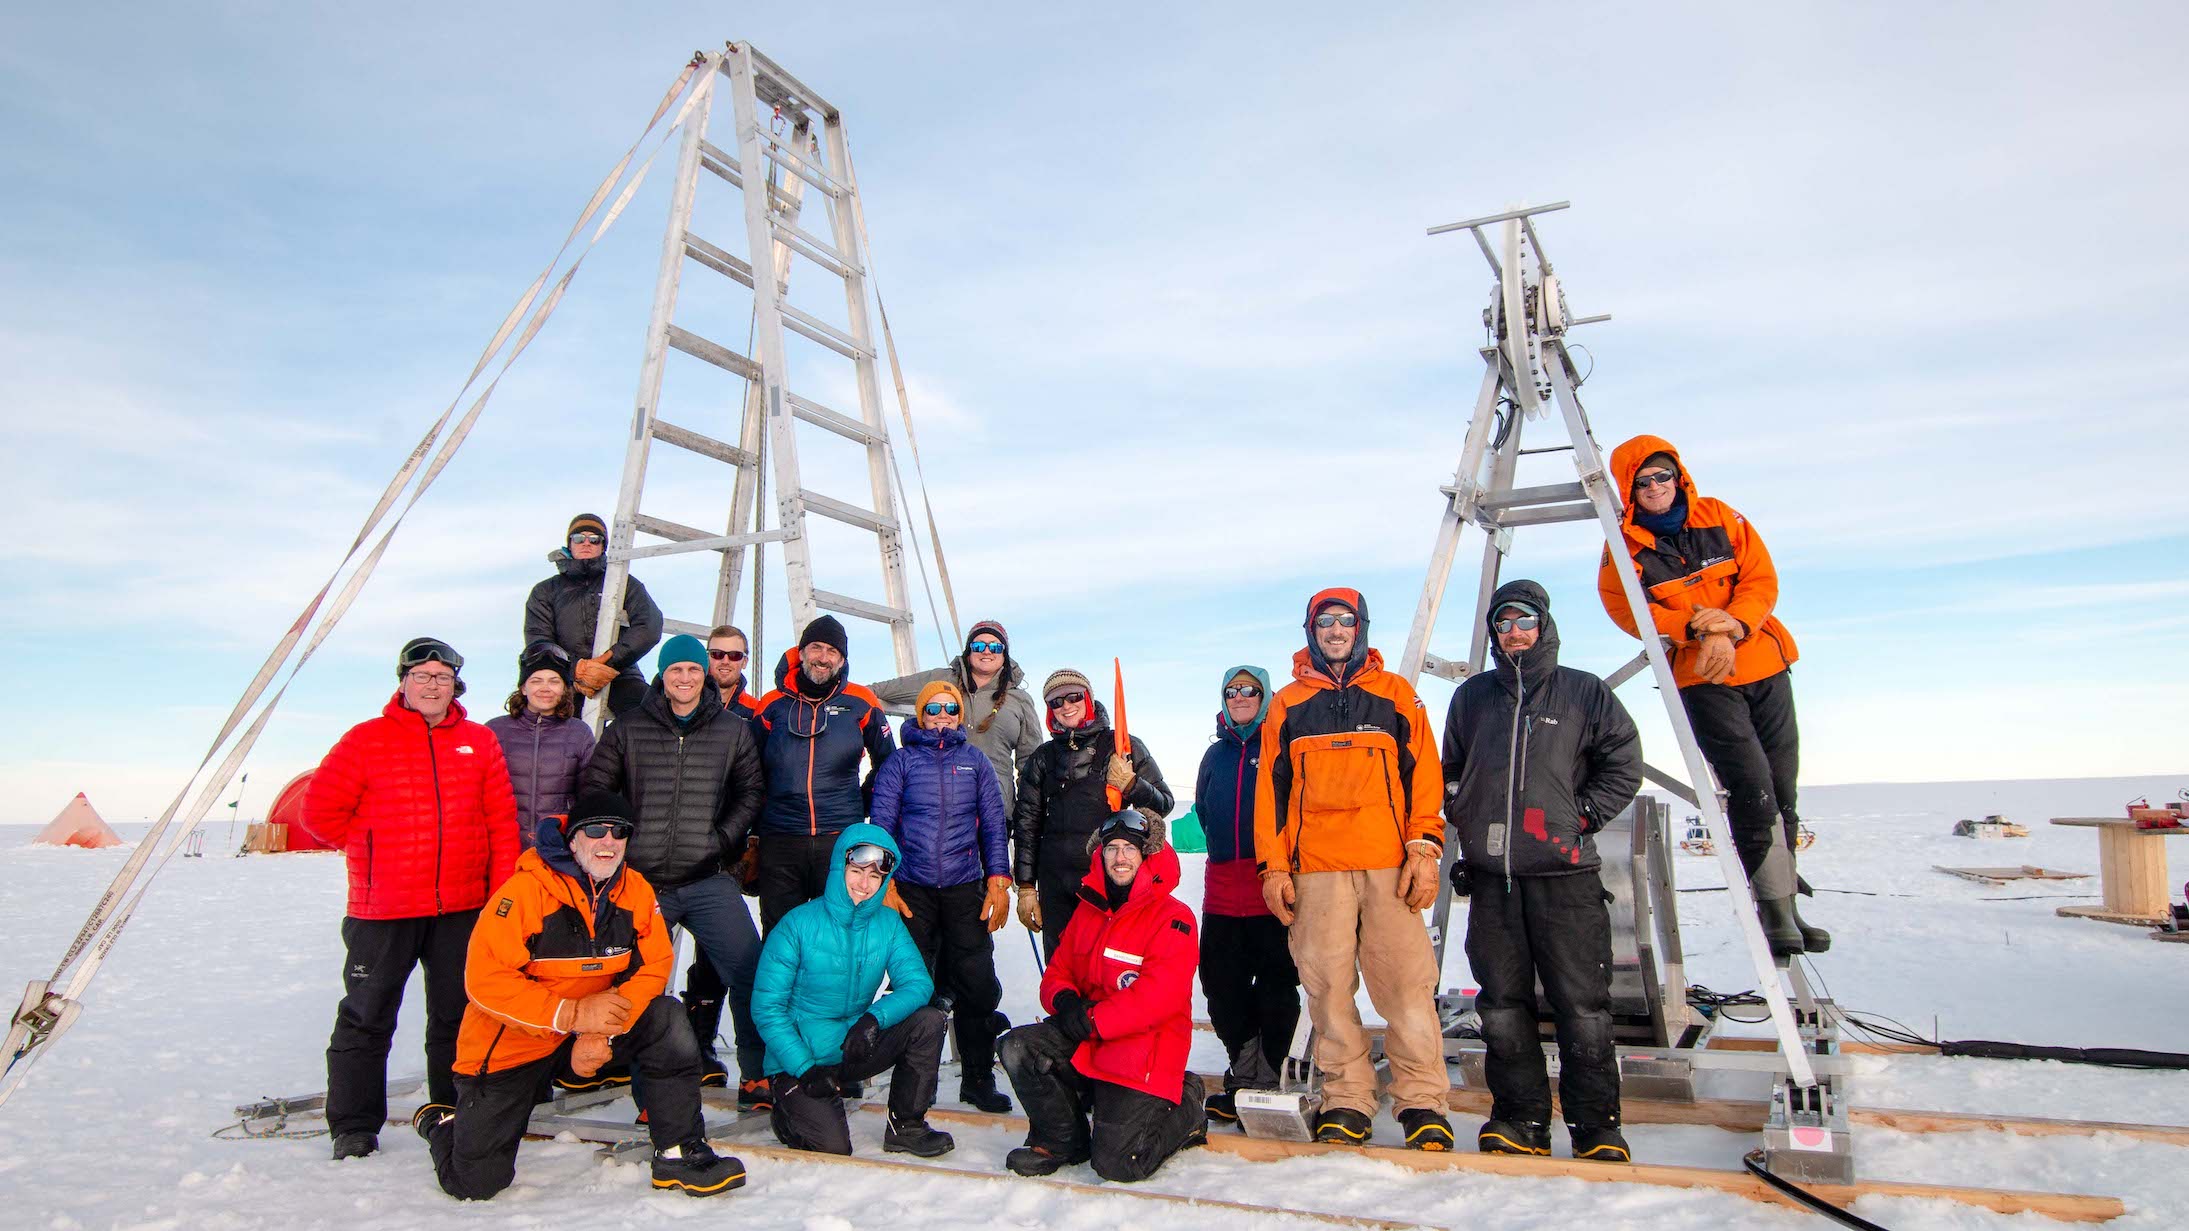 Photo of the MELT and Icefin teams and camp at Thwaites Glacier in 2020. Credit: Icefin/ITGC/Dichek